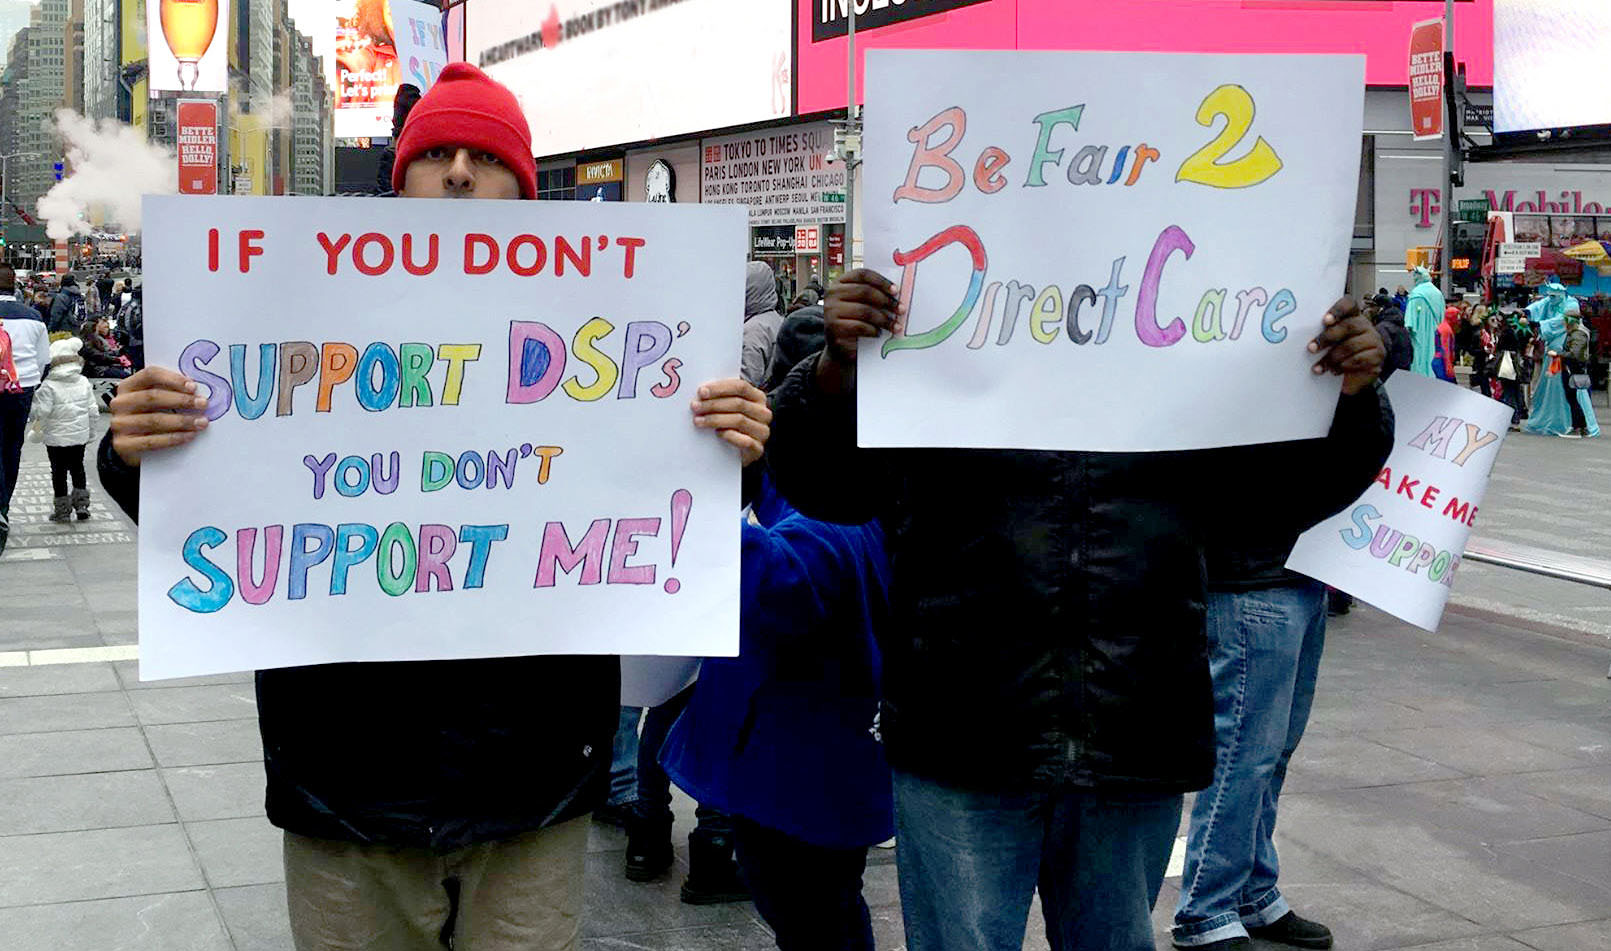 Photo at the top of the opening page for the article "The Direct Support Workforce Crisis: A Systemic Failure." The photo shows two individuals standing in Times Square in New York holding up signs as part of a BFair2DirectCare rally. The signs say, "If you don’t support DSPs you don’t support me!" and "Be Fair 2 Direct Care."